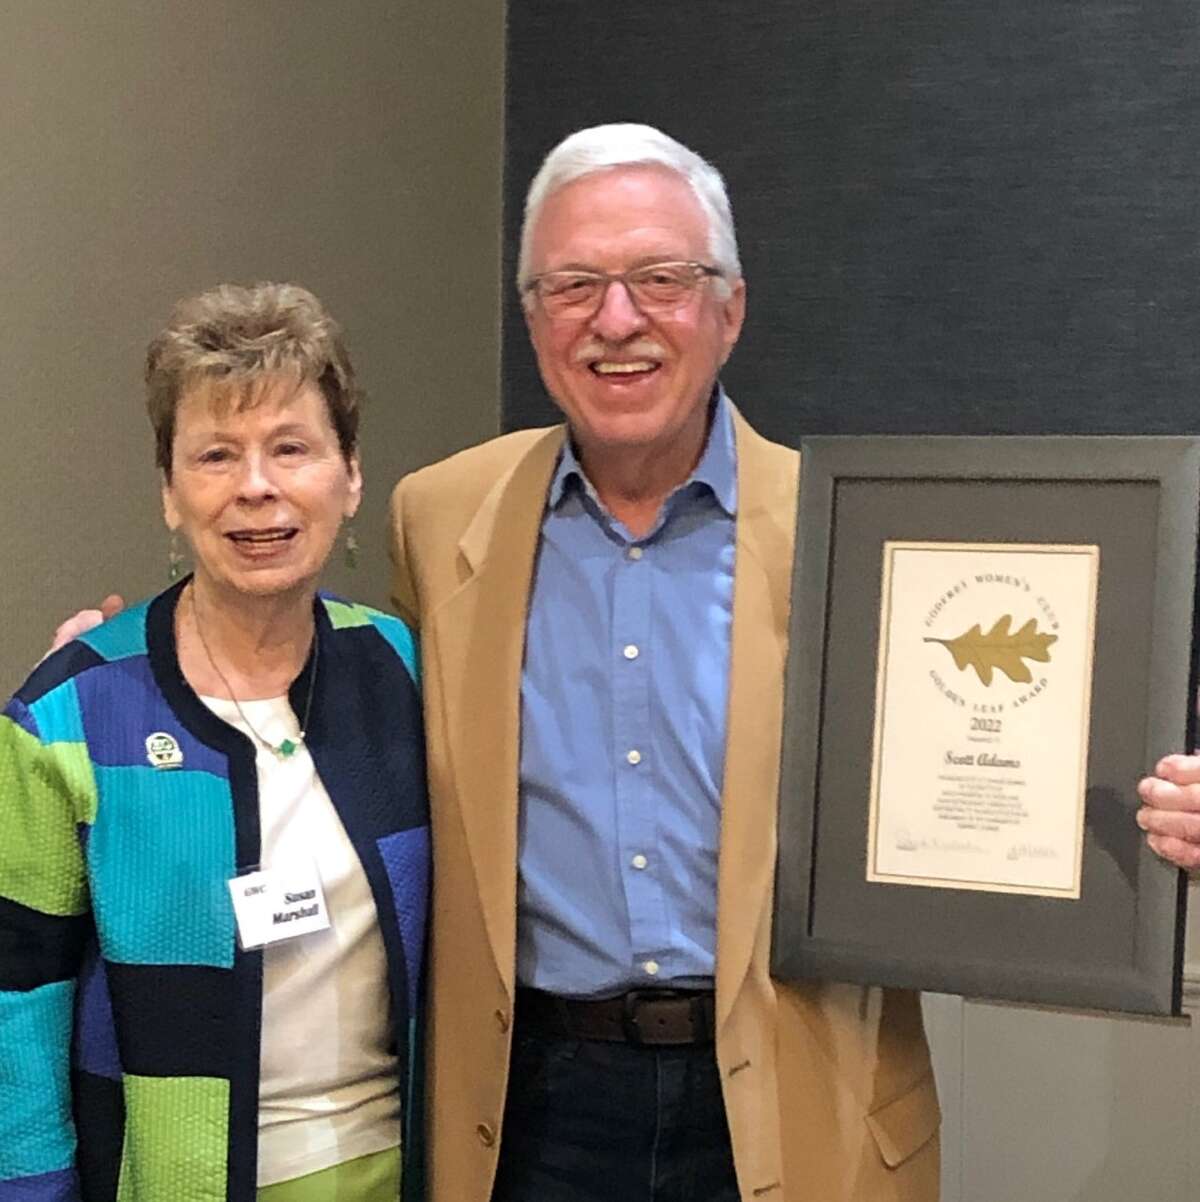 Susan Marshall, 1st Vice President of the Godfrey Women's Club presented the 2022  Golden Leaf Award to Scott Adams.